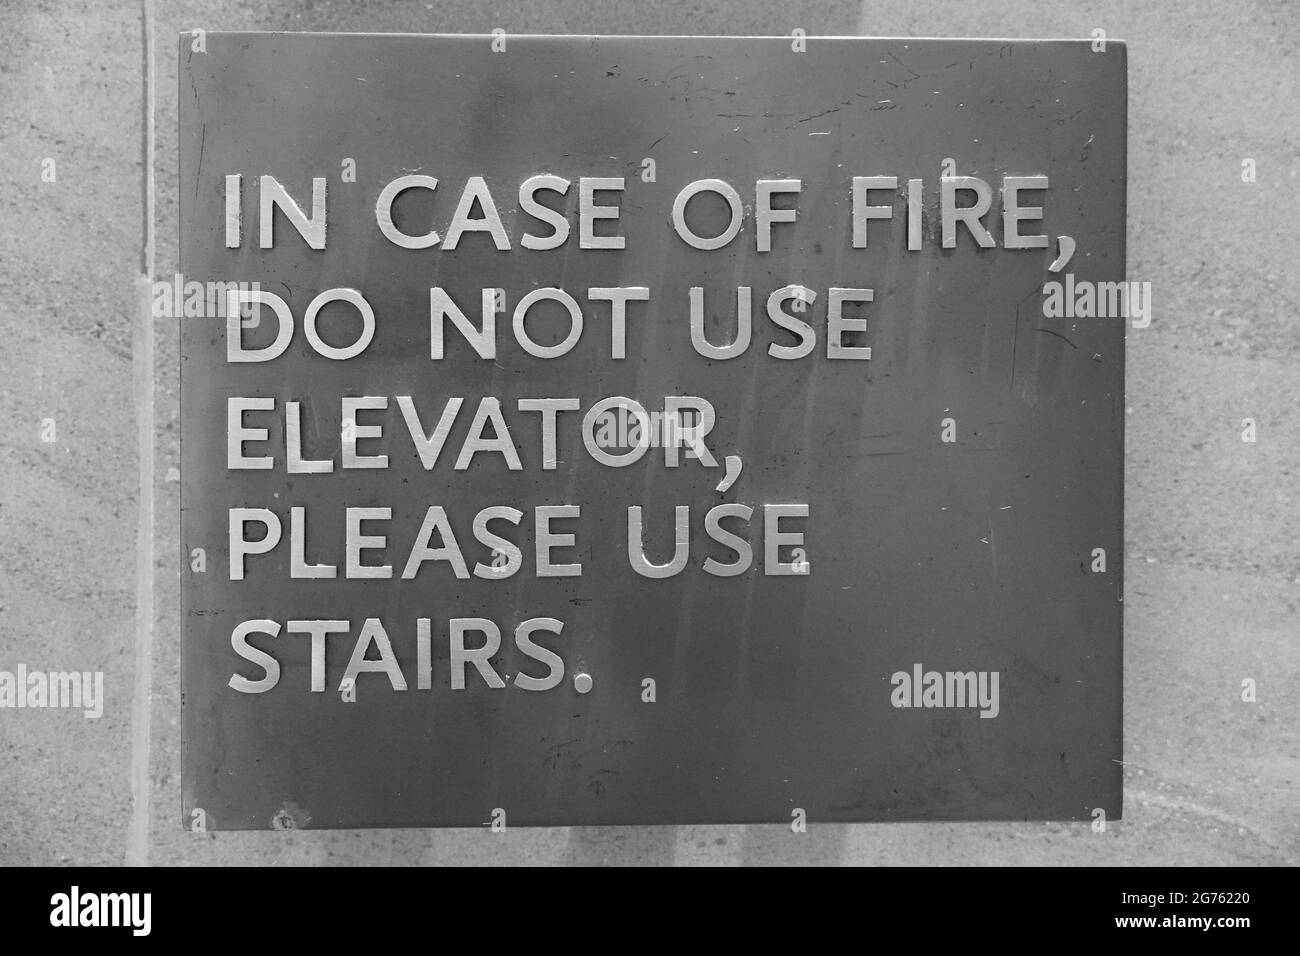 A sign that says, In Case Of Fire, Do Not Use Elevator, Please Use Stairs, which direct people of what to do in case of an fire emergency. Black and W Stock Photo